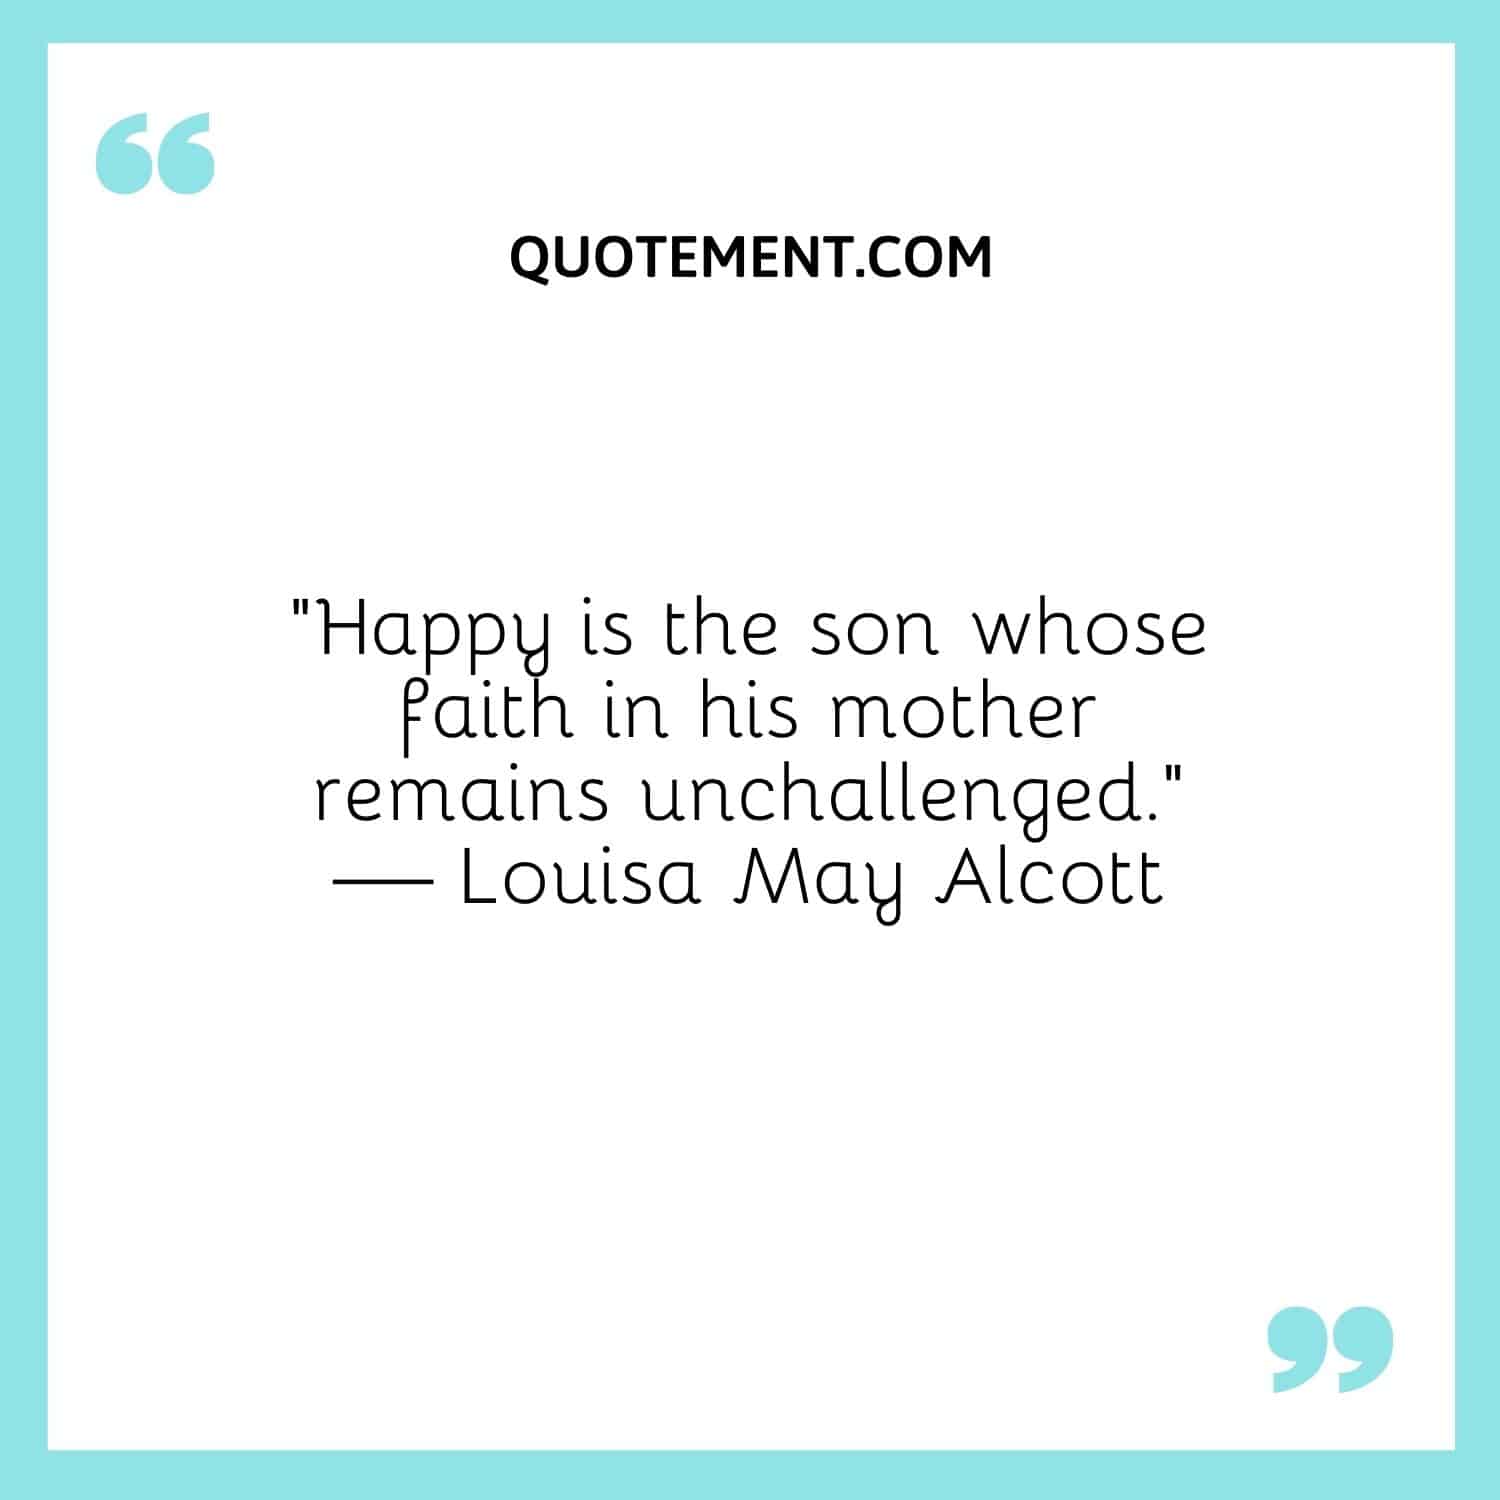 Happy is the son whose faith in his mother remains unchallenged